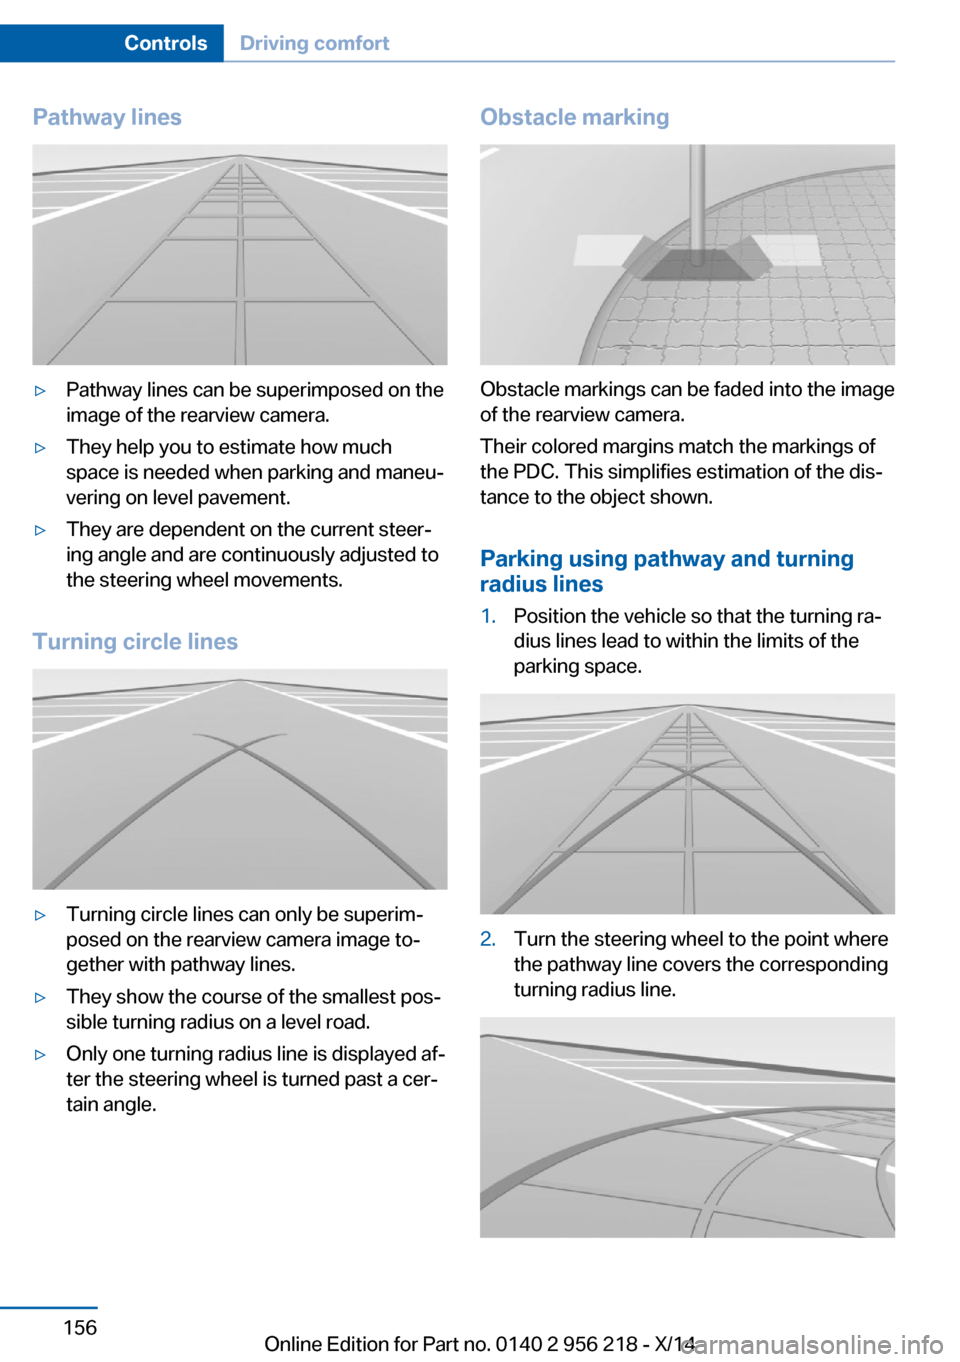 BMW 5 SERIES 2014 F10 Owners Guide Pathway lines▷Pathway lines can be superimposed on the
image of the rearview camera.▷They help you to estimate how much
space is needed when parking and maneu‐
vering on level pavement.▷They a